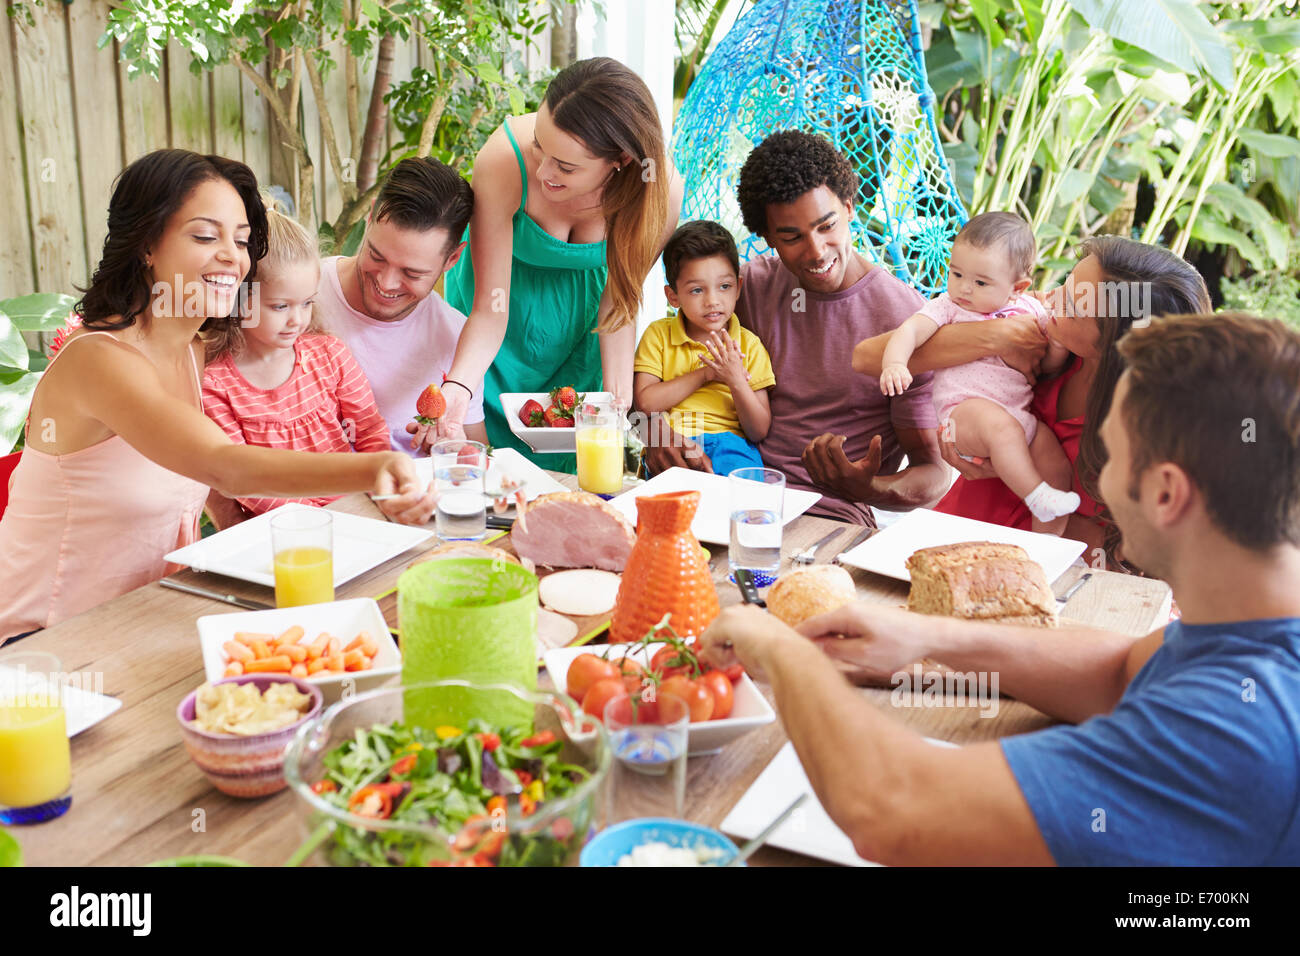 Group Of Families Enjoying Outdoor Meal At Home Stock Photo